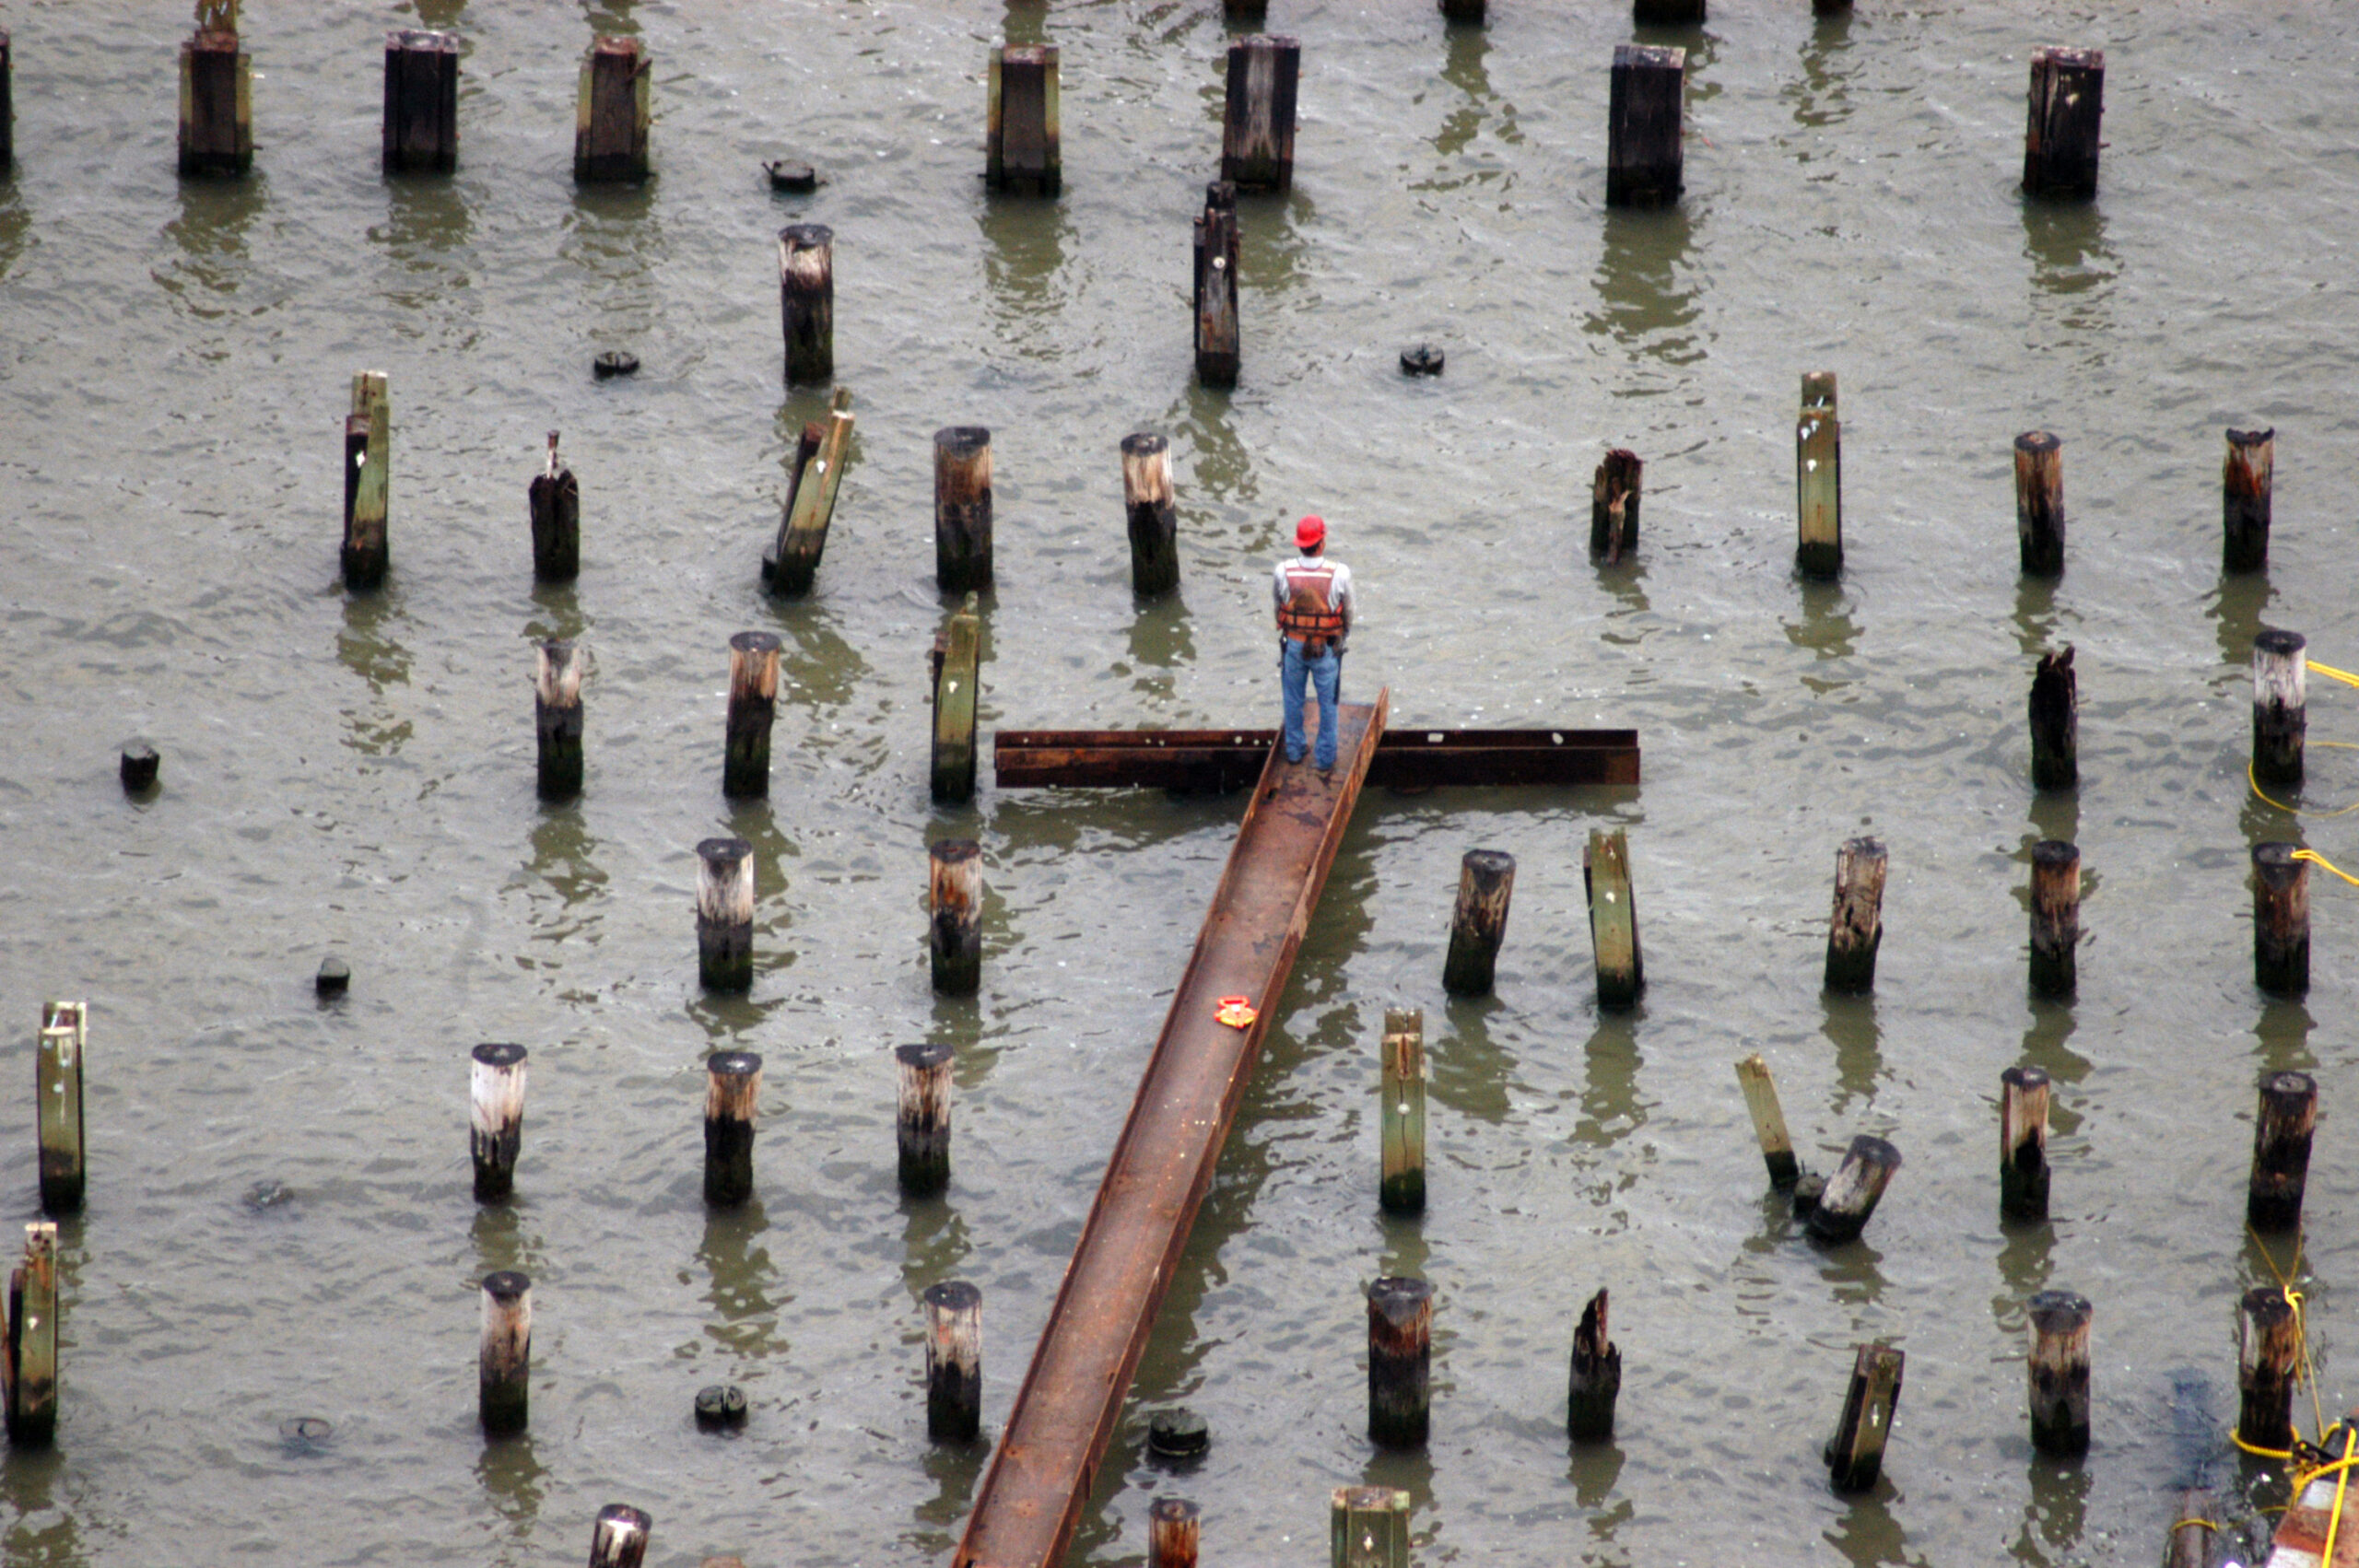 A construction worker standing on a beam in the middle of a pile field in the Hudson River.